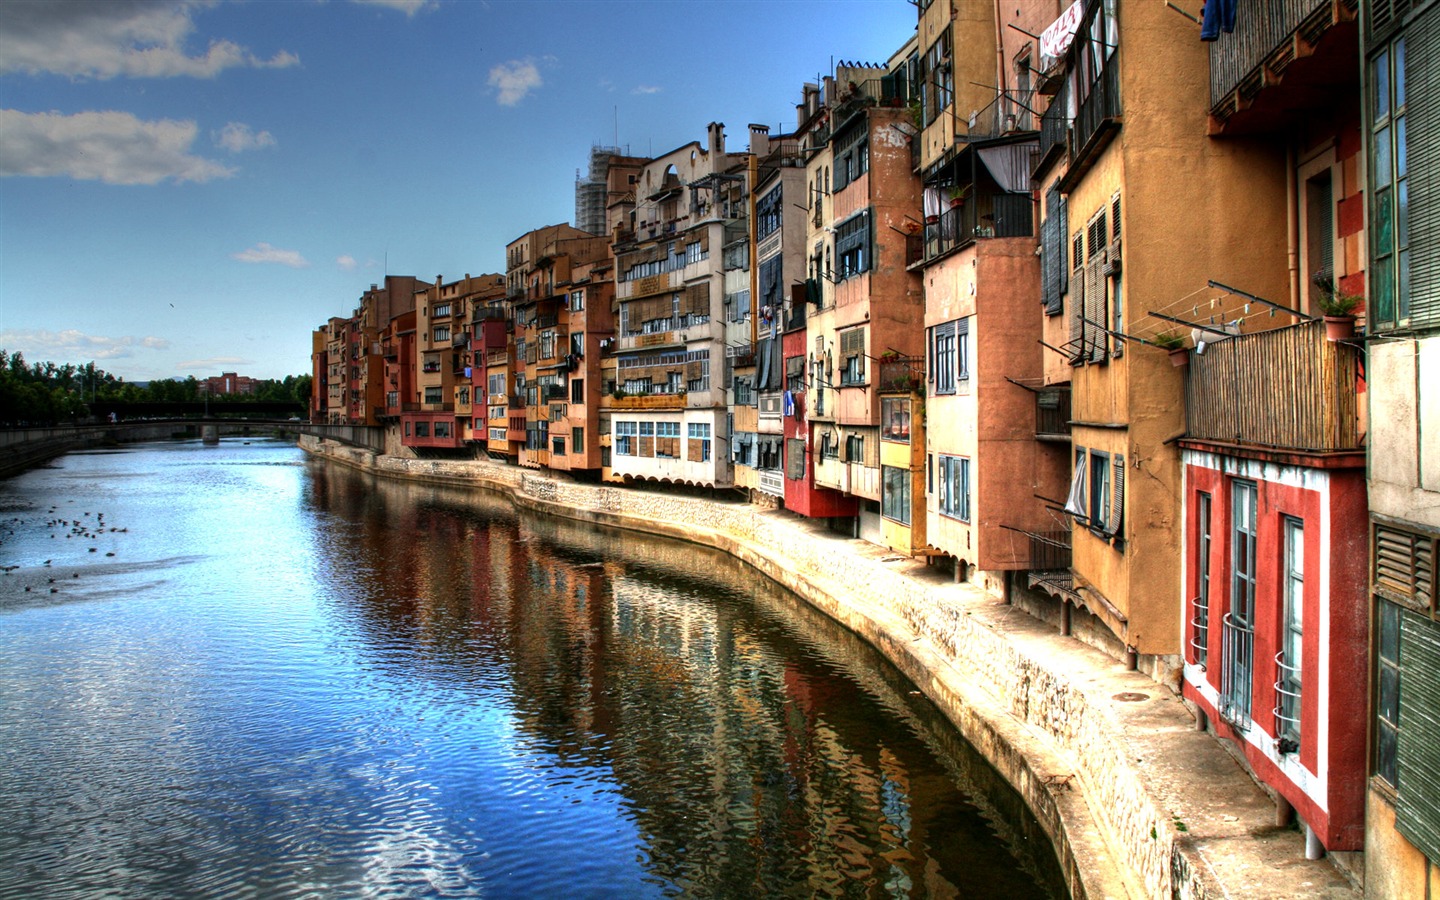 Spain Girona HDR-style wallpapers #1 - 1440x900